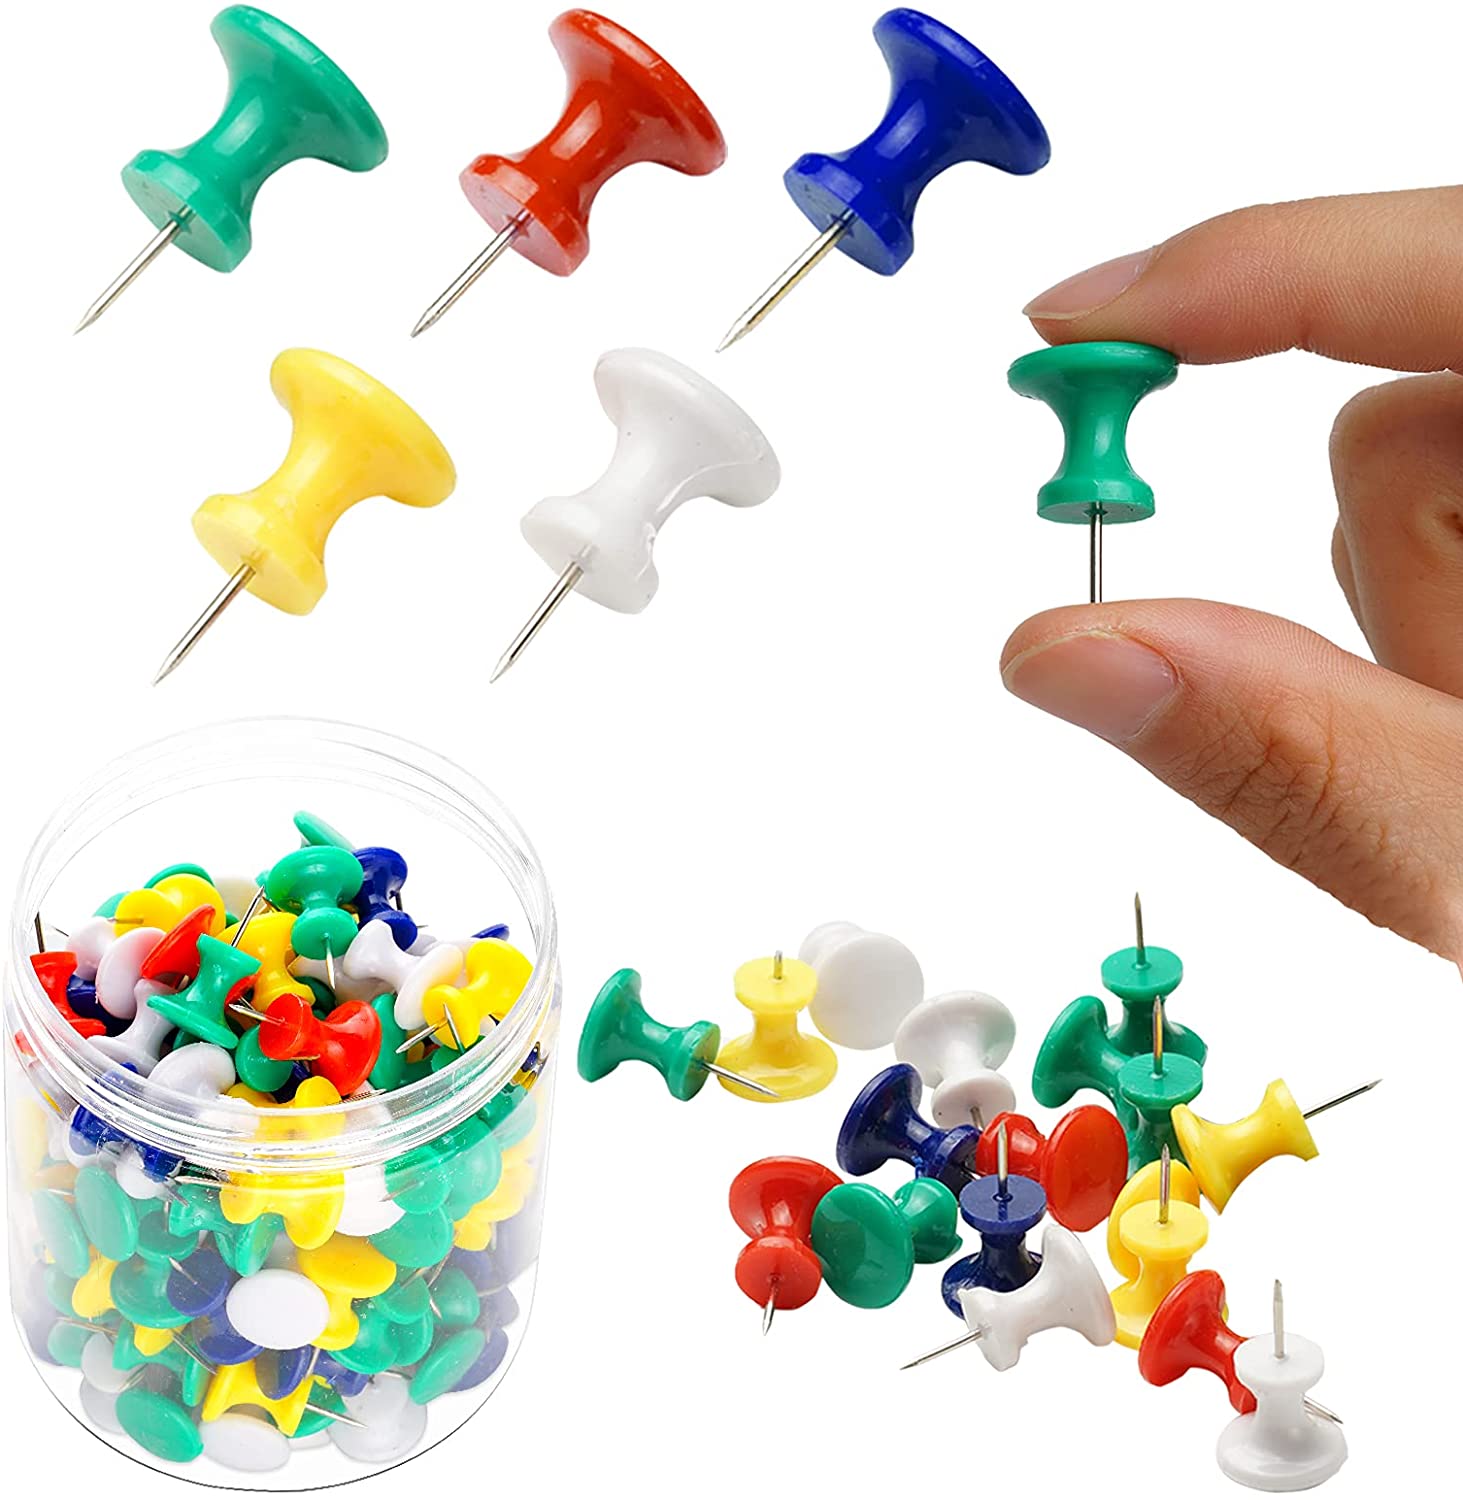 160 Pieces Giant Thumbtacks 1 Inch Standard Push Pins with Steel Point and  Plastic Head (Red, Yellow, Blue, Green, White)